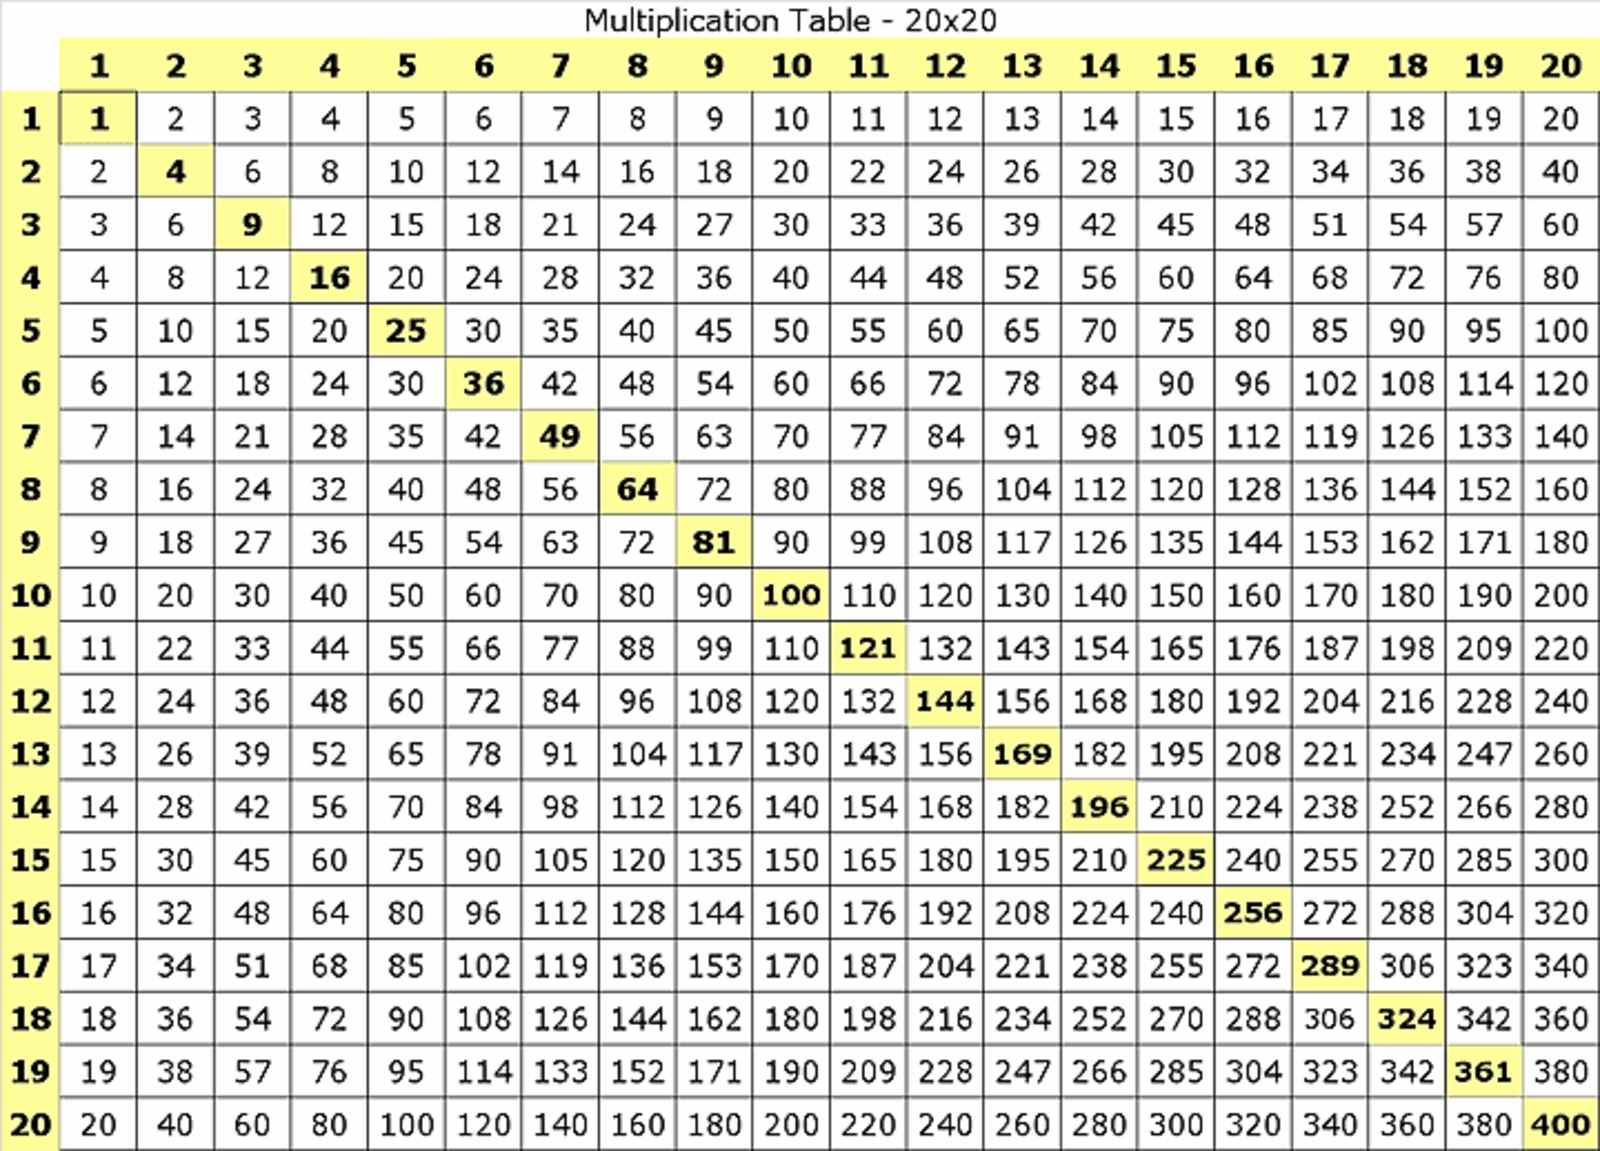 multiplication tables from 1 to 20